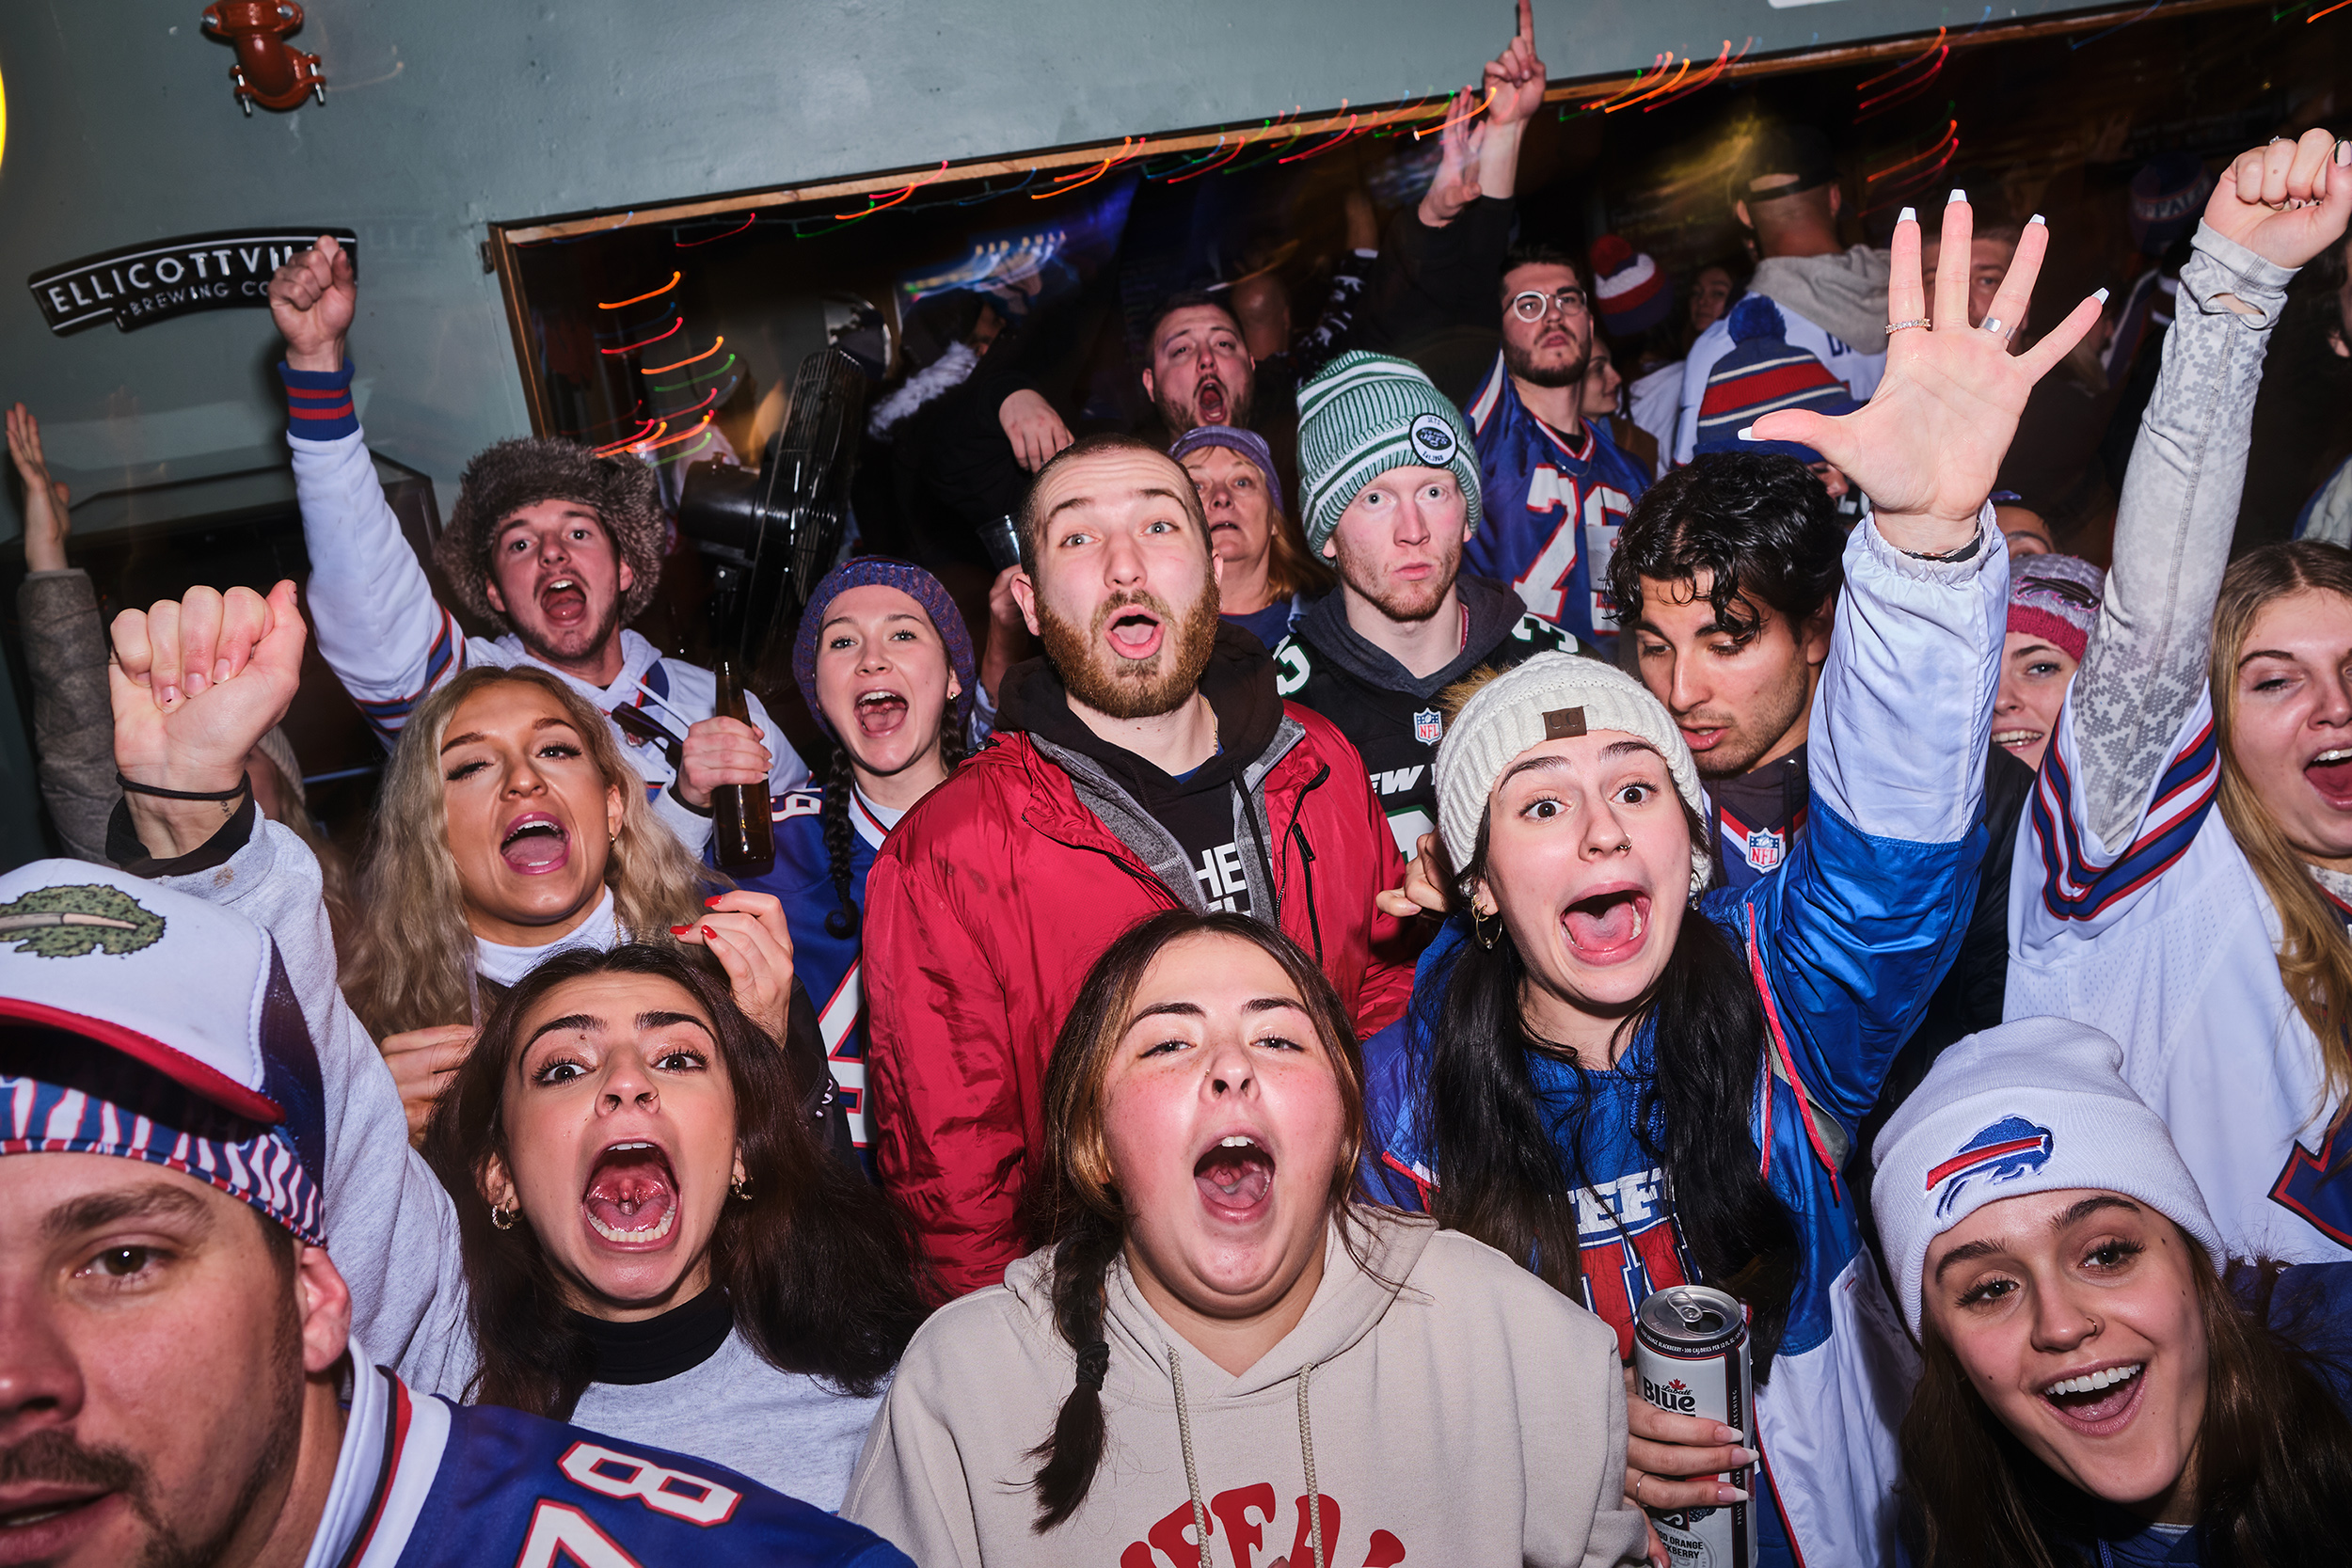 A group of fans cheer on the Bills in a bar.